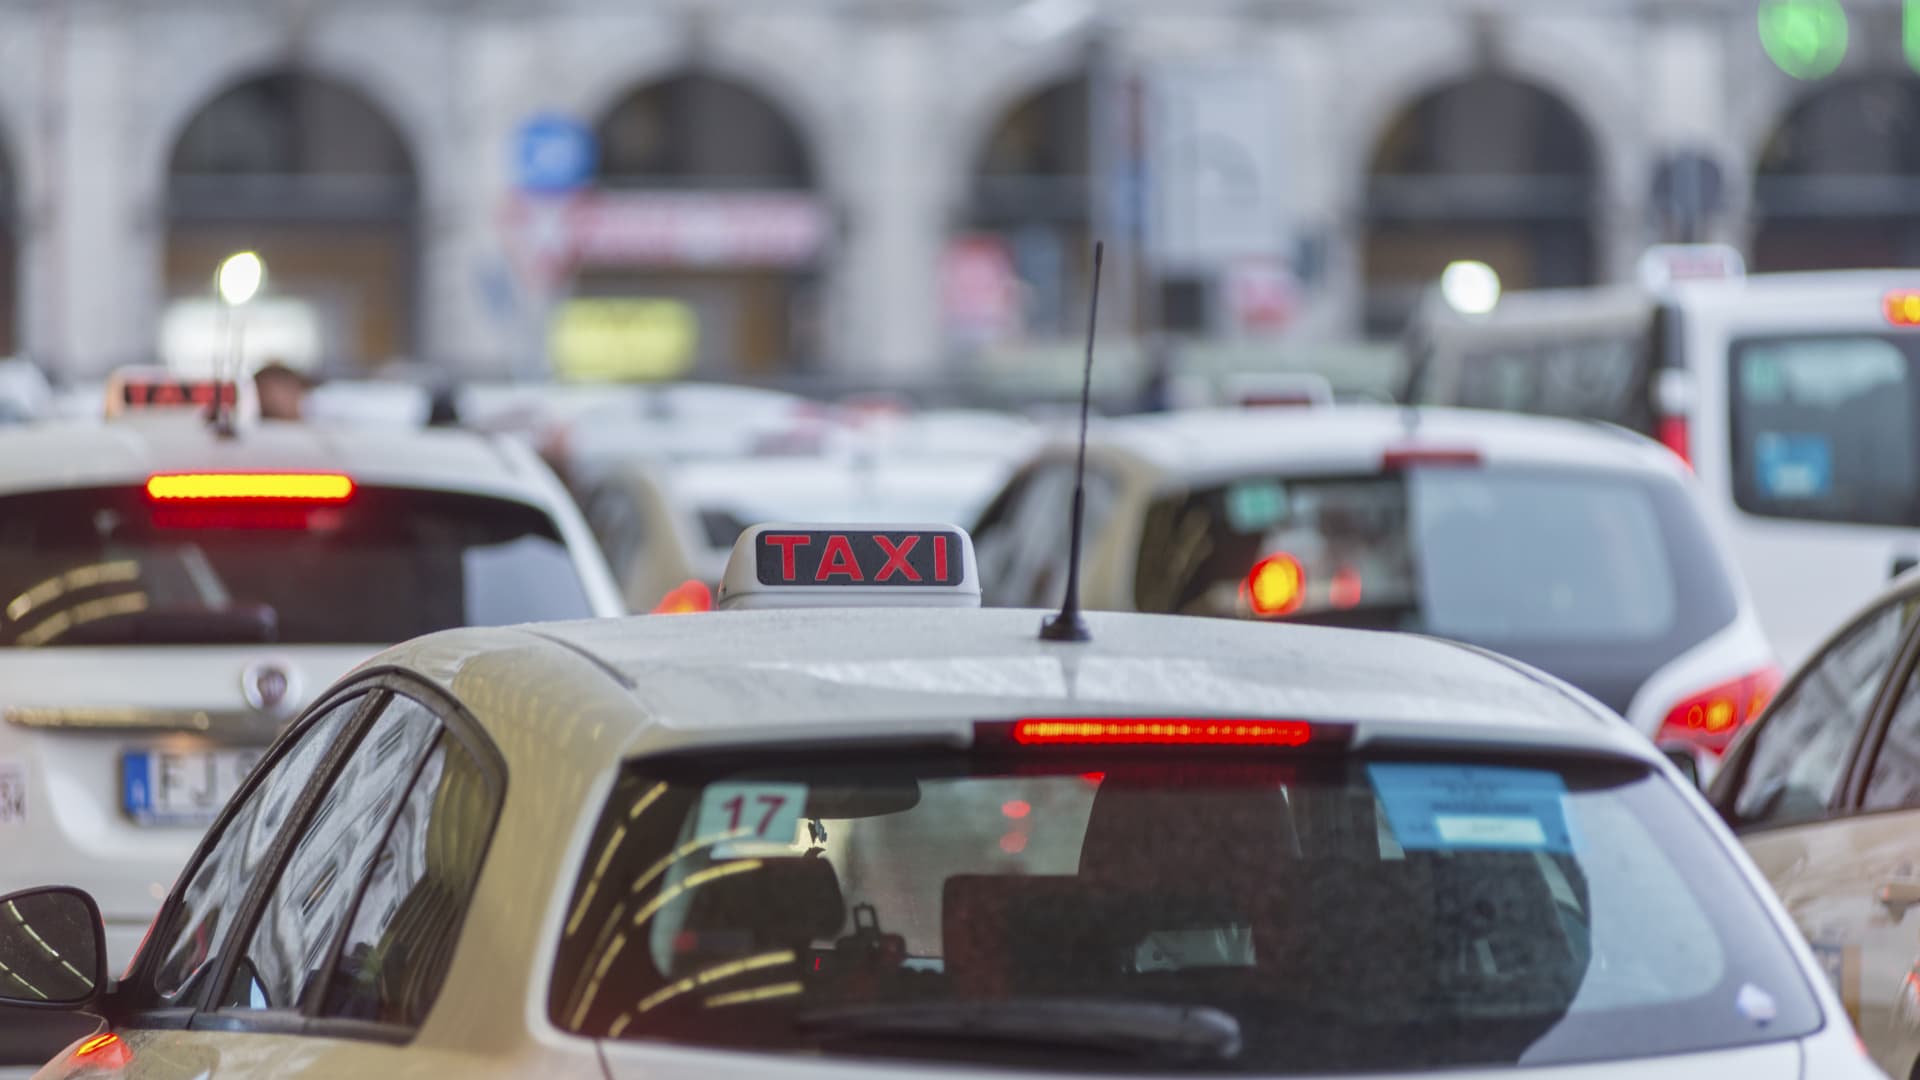 Cabbing in Italy can be a gnarly affair. Here’s how to navigate it